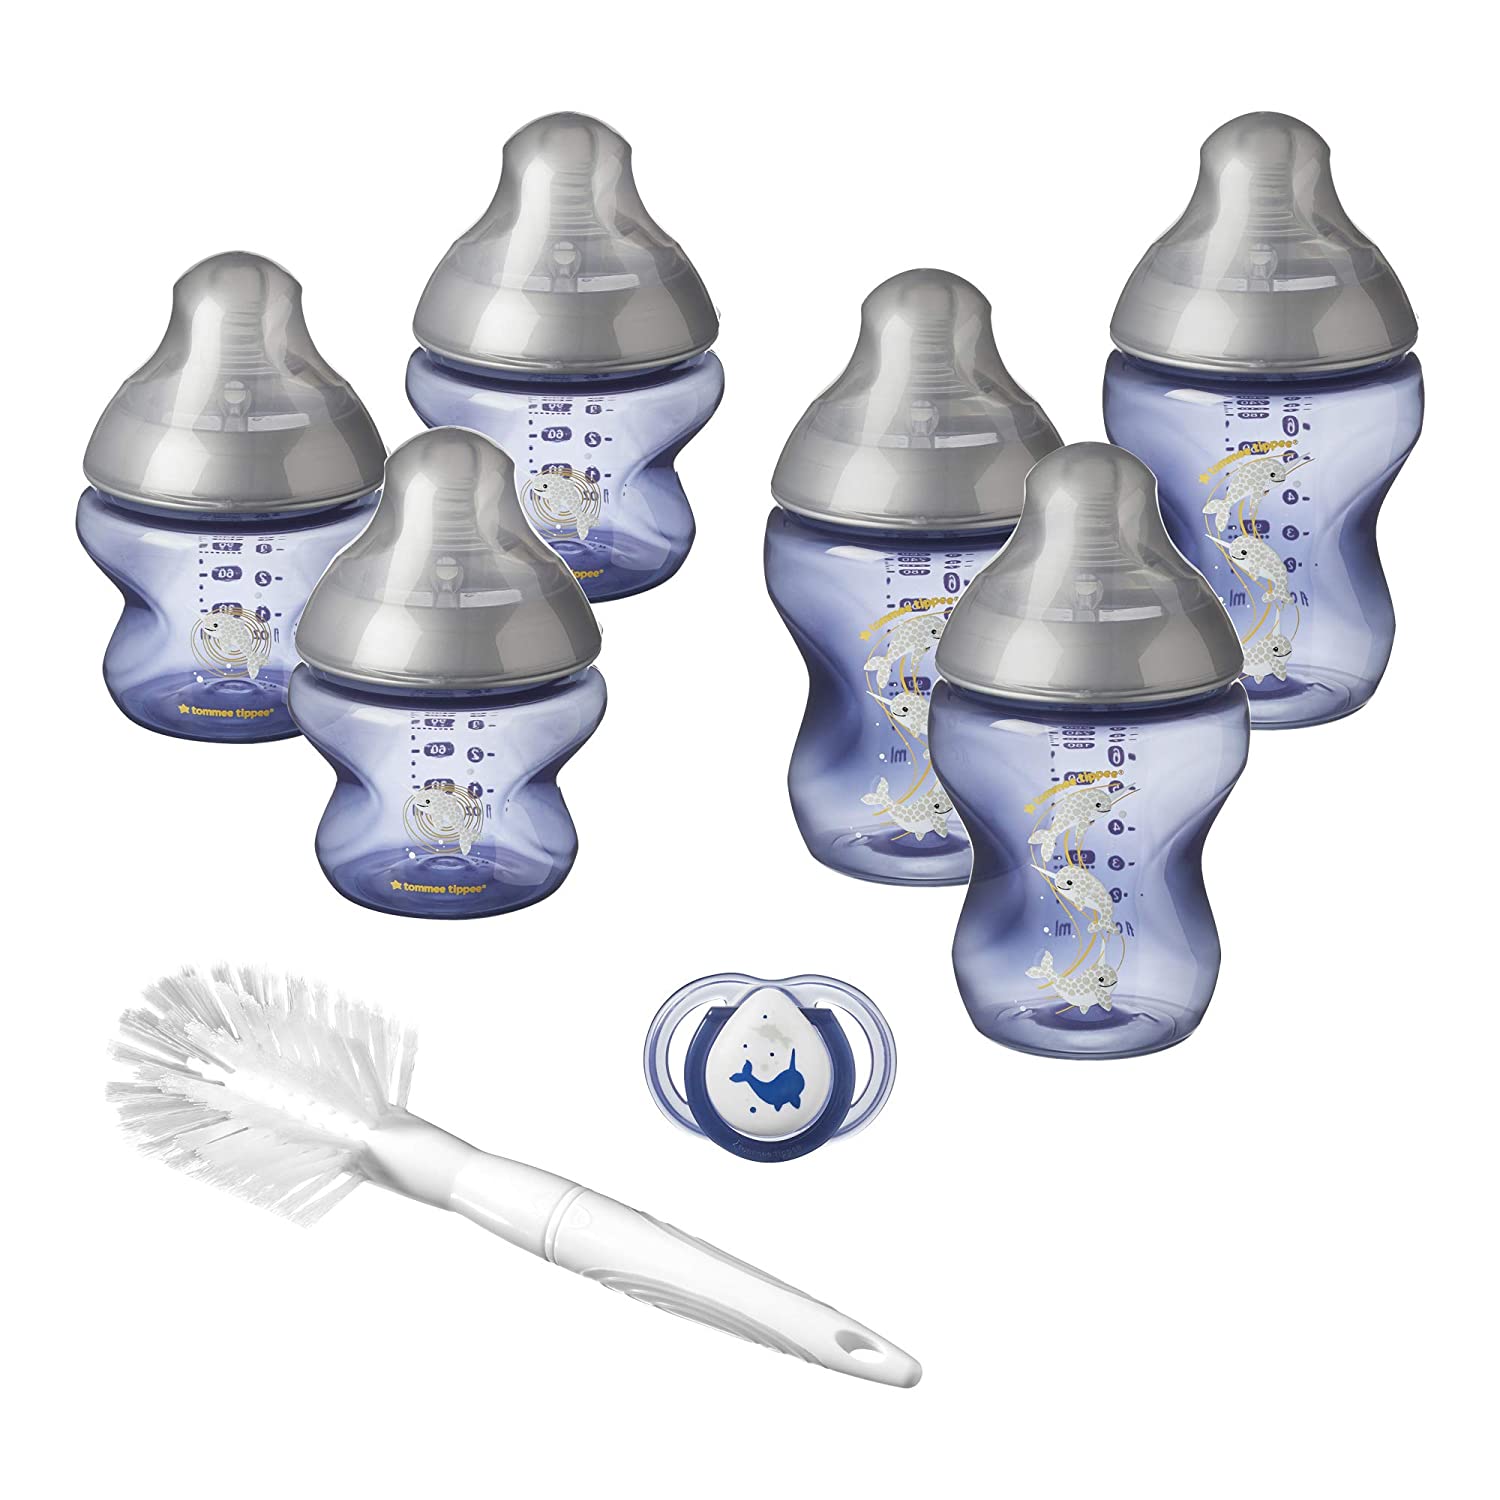 Tommee Tippee Closer to Nature® New Born Bottle Starter Kit Breast Like Teat with Anti Colic Valve, Blue Narwhal Decoration